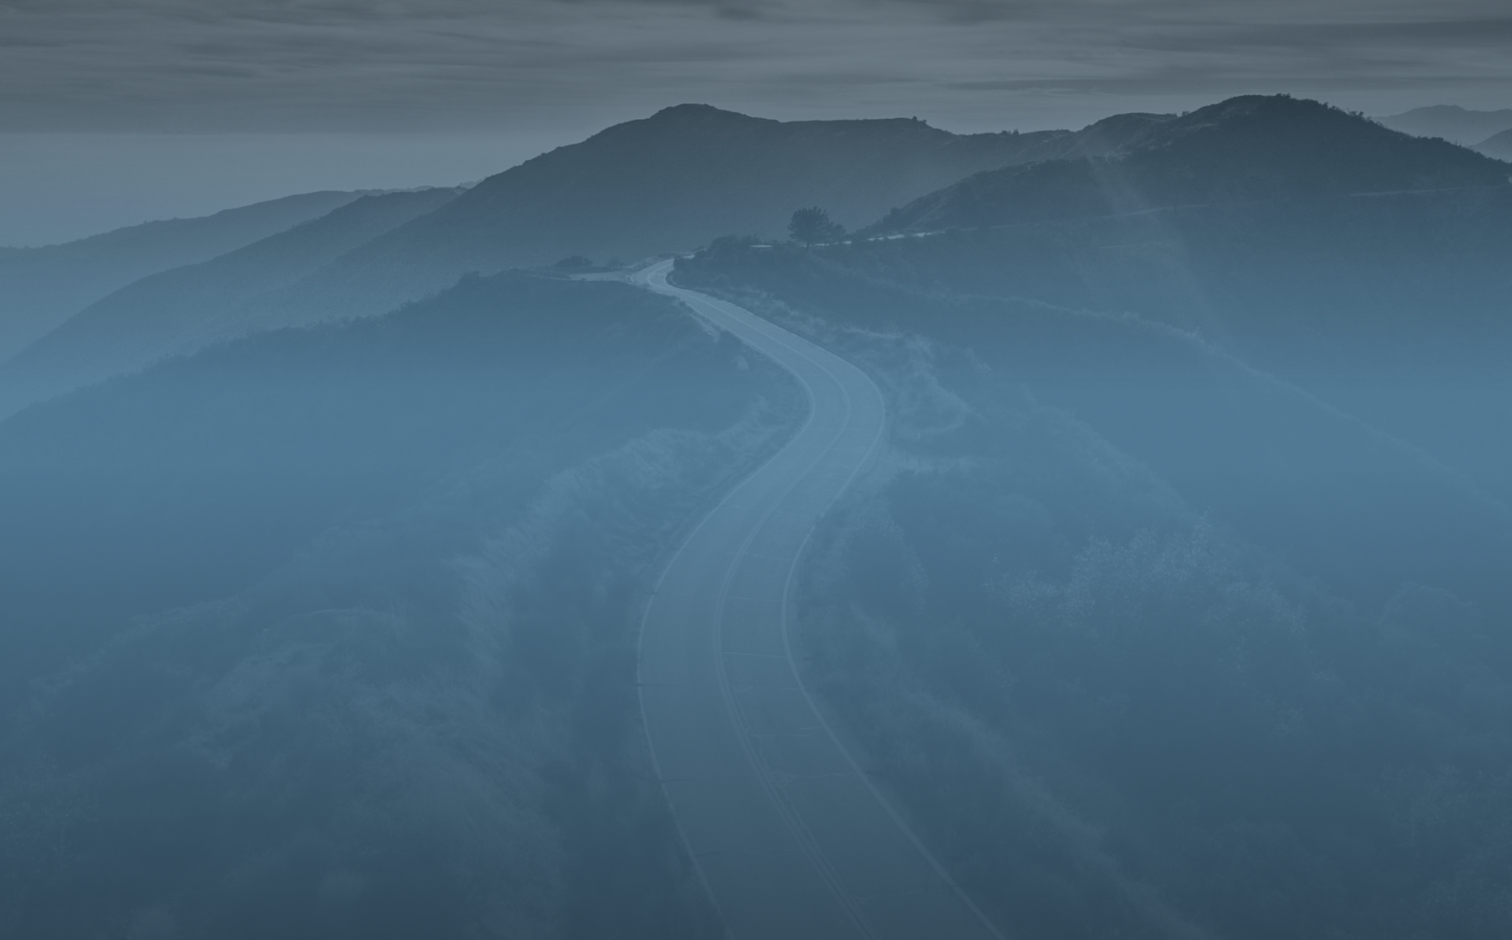 Highway through the mountains